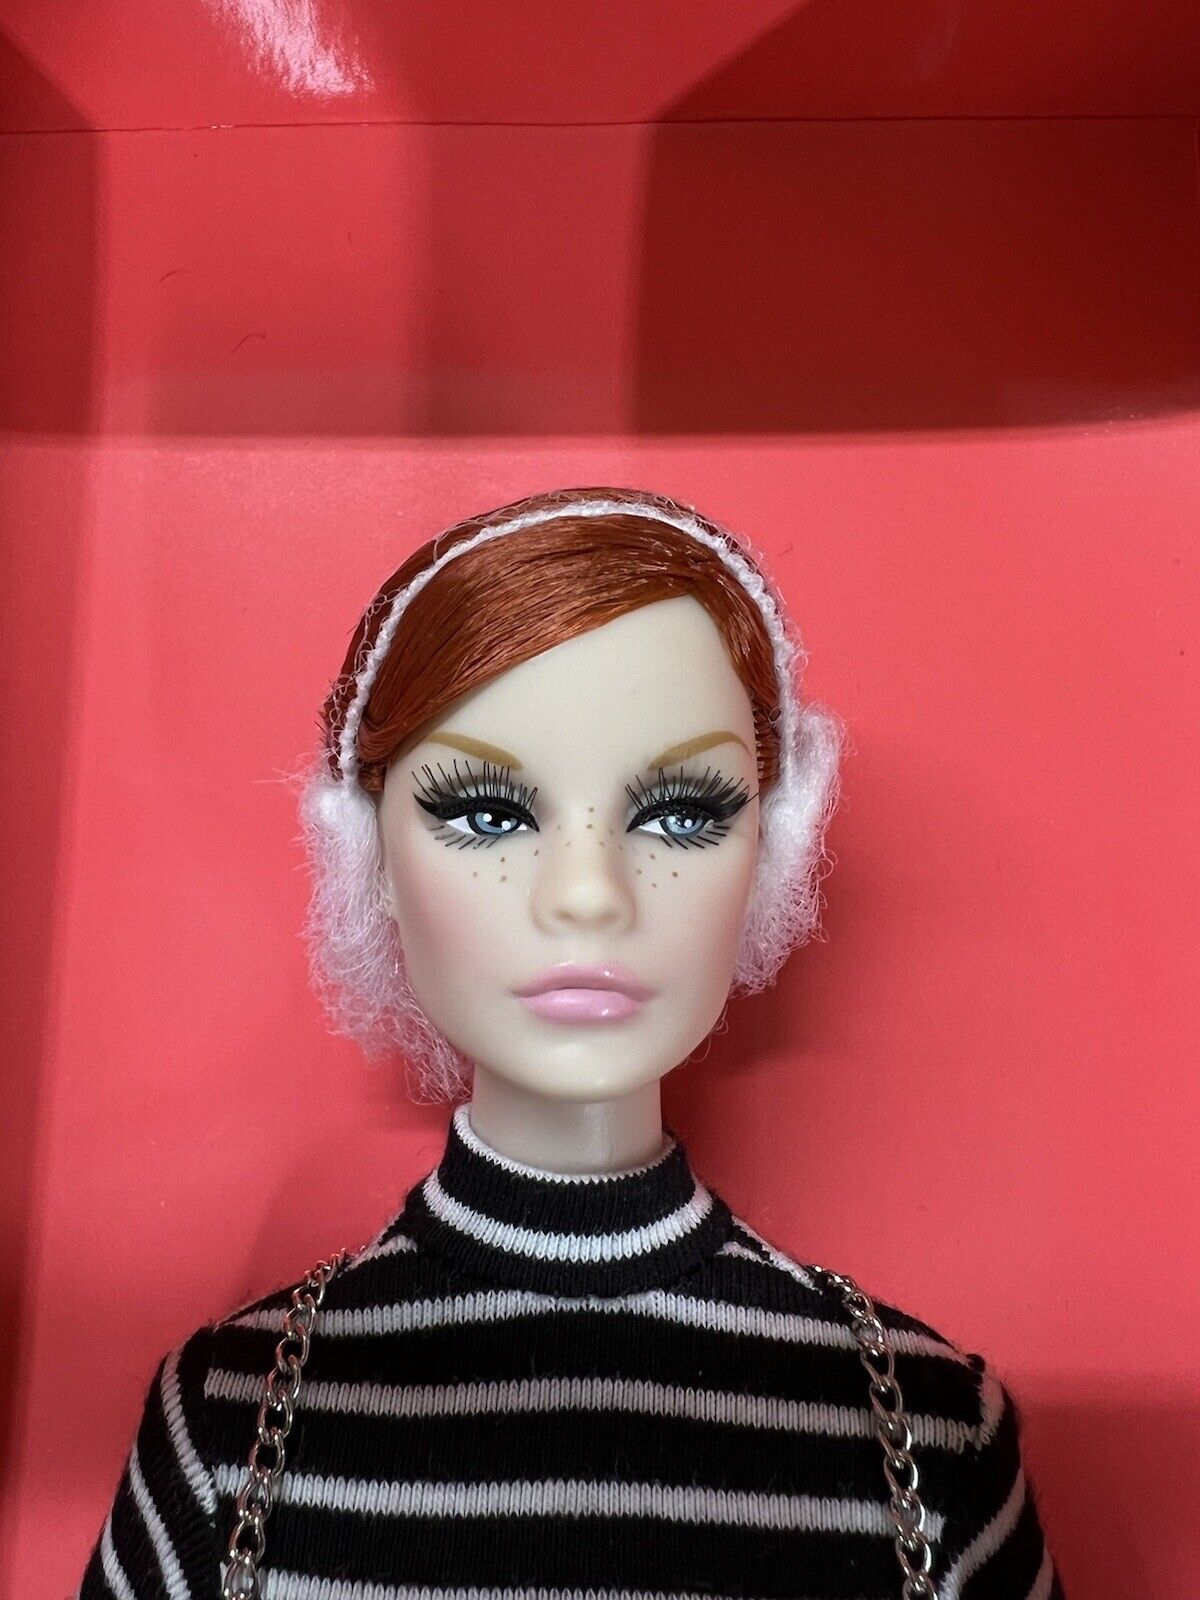 Integrity Ginger Gilroy “Chain Reaction” Poppy Parker Collection Doll